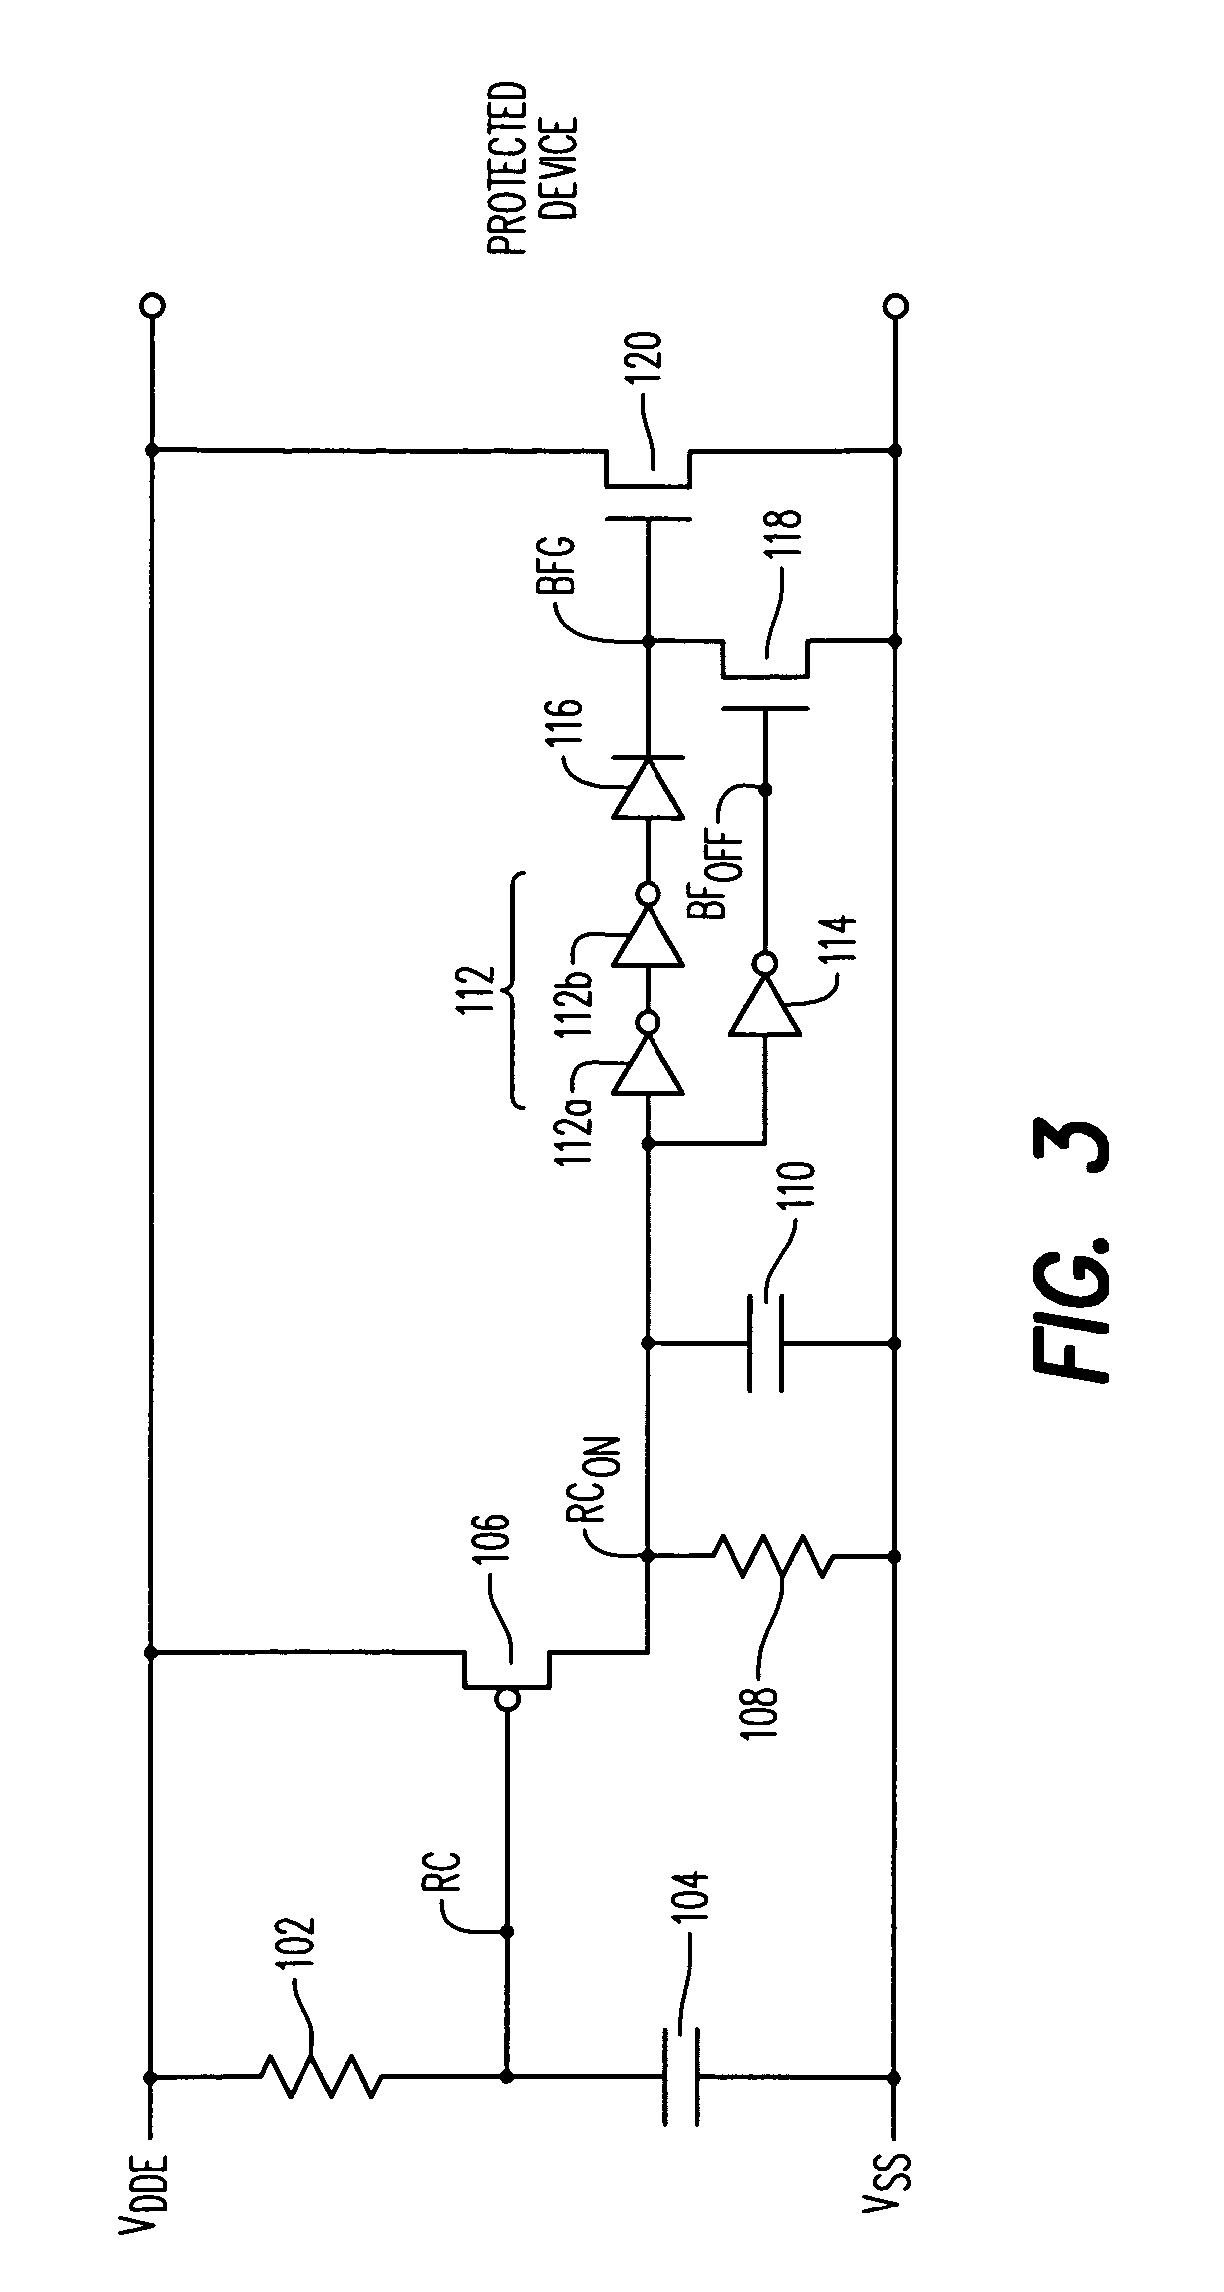 Electrostatic discharge device with variable on time